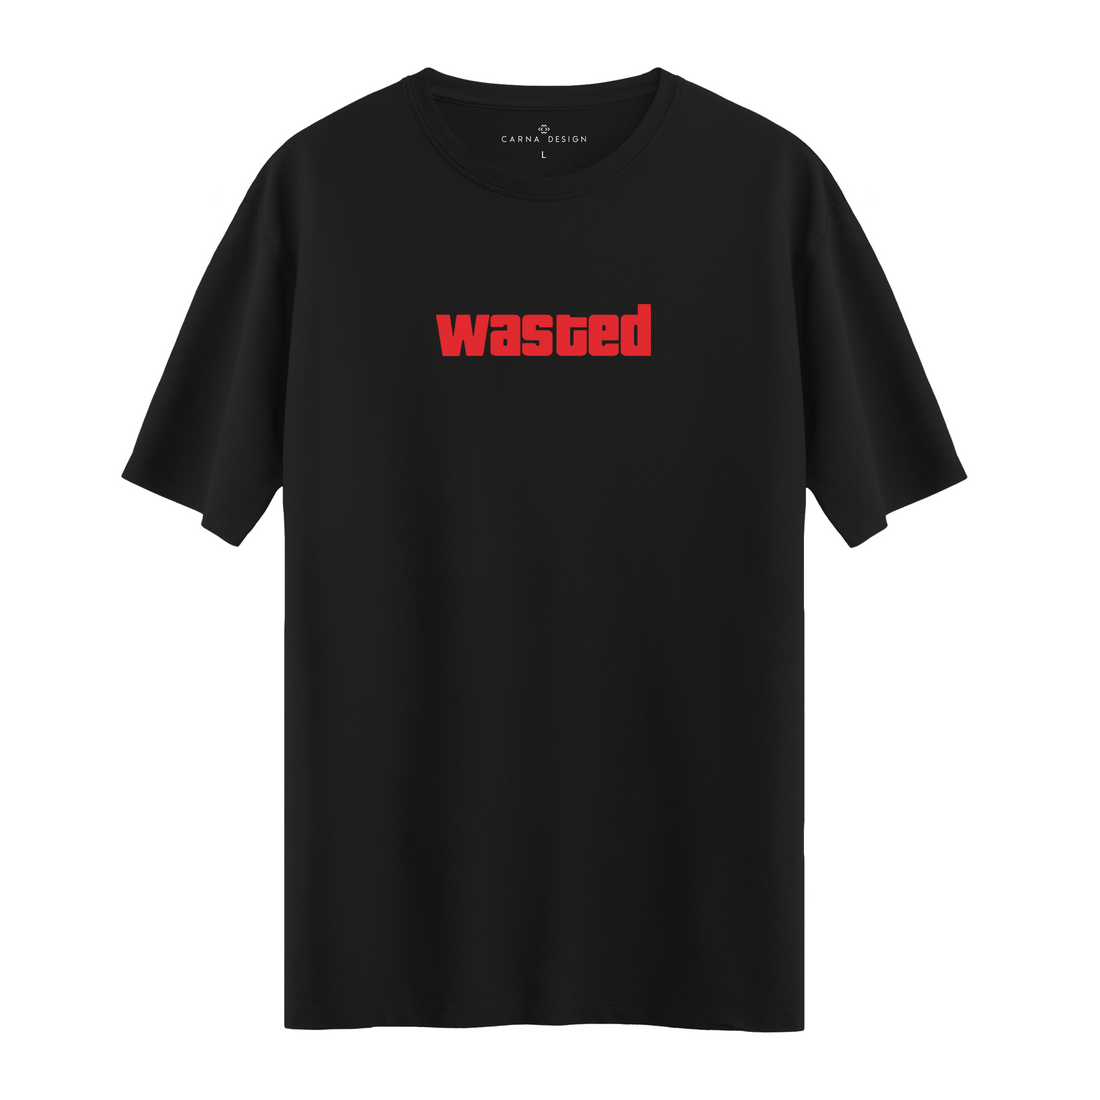 Wasted - Oversize T-shirt